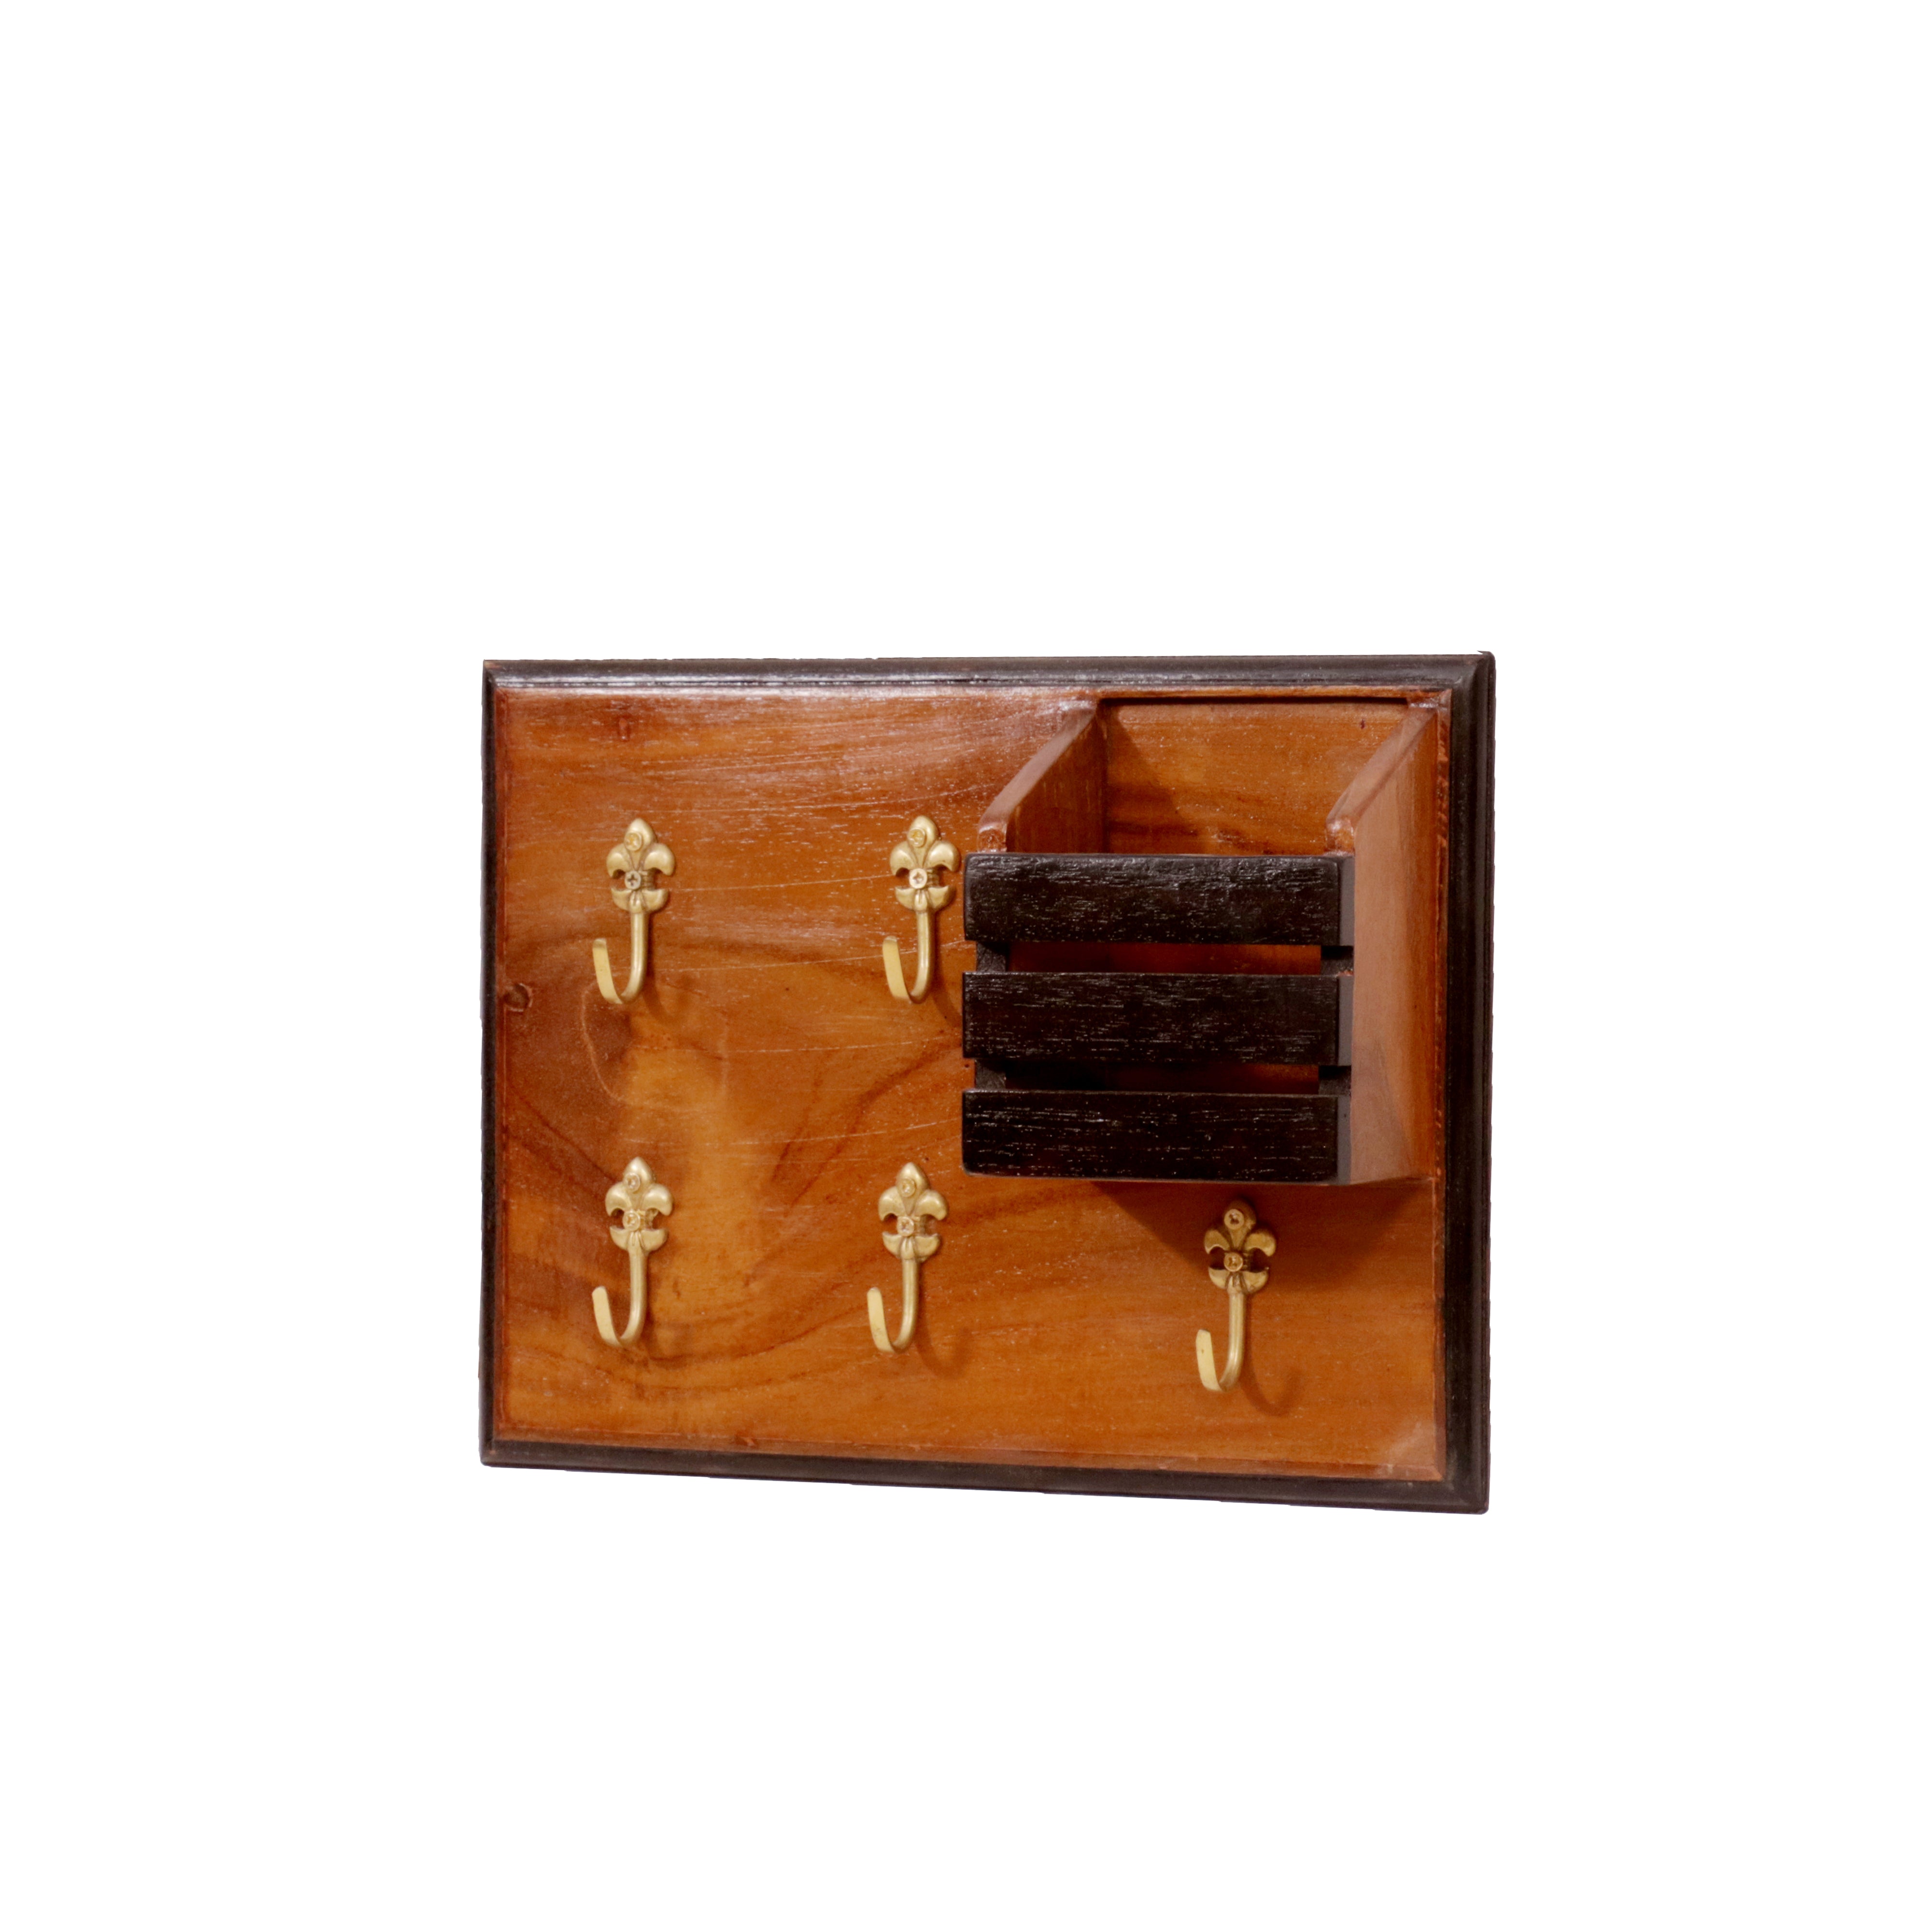 Wooden Traditional 5-Keyholder with 1 Handle Key Holder